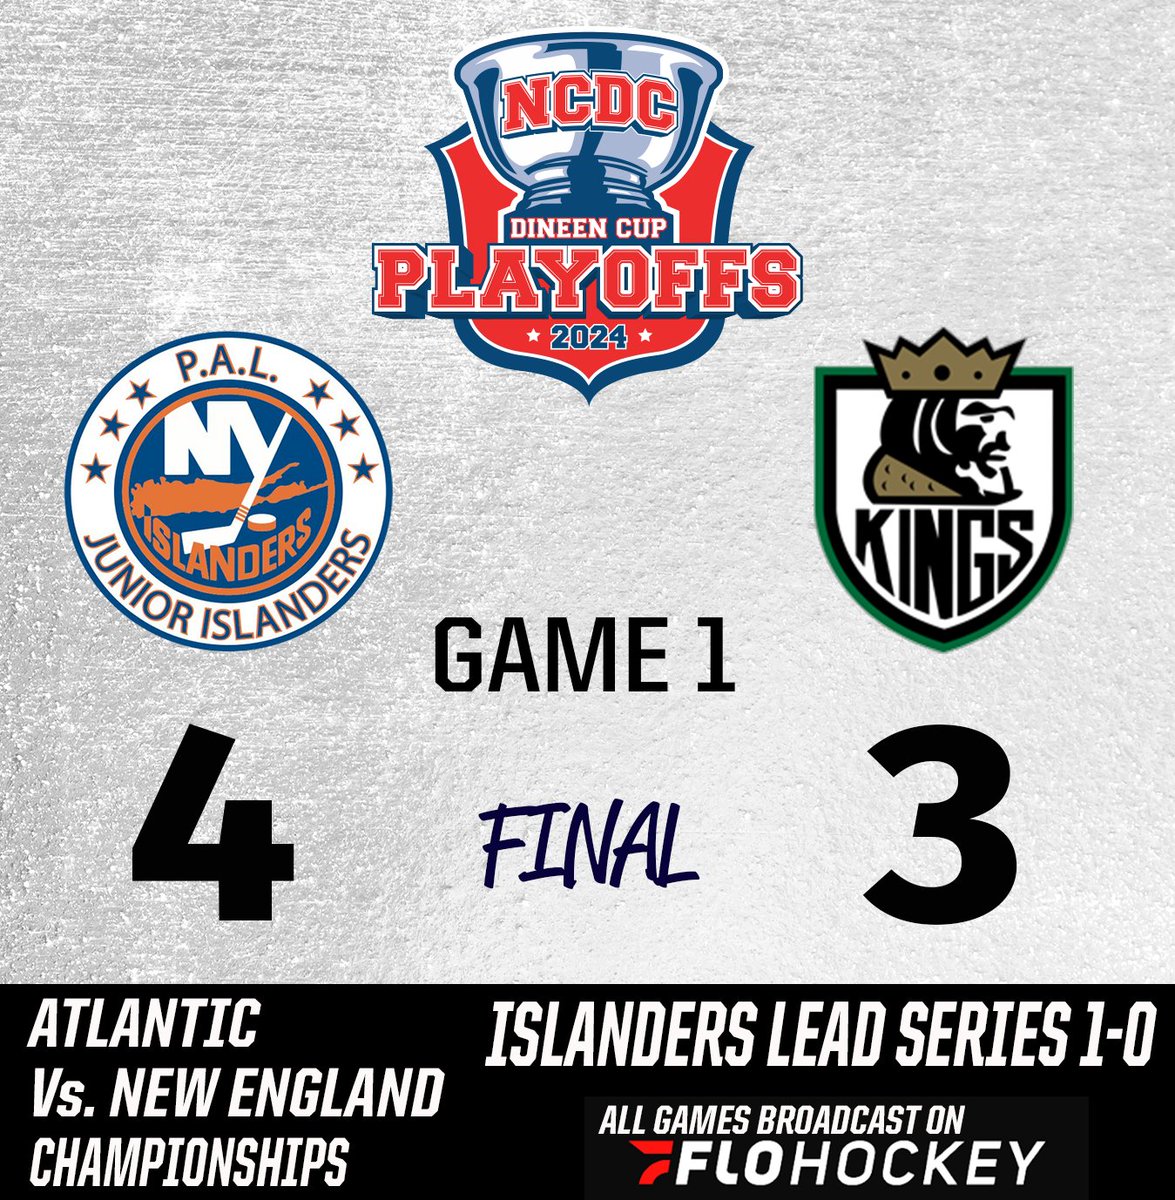 Again, here is your final score from the @paljrislanders vs. @SSK_Hockey Game 1 in the Atlantic vs. New England Championship Series. A 4-0 lead for P.A.L. slipped away in the final 3:46 of the game, but the home team held on for the W.